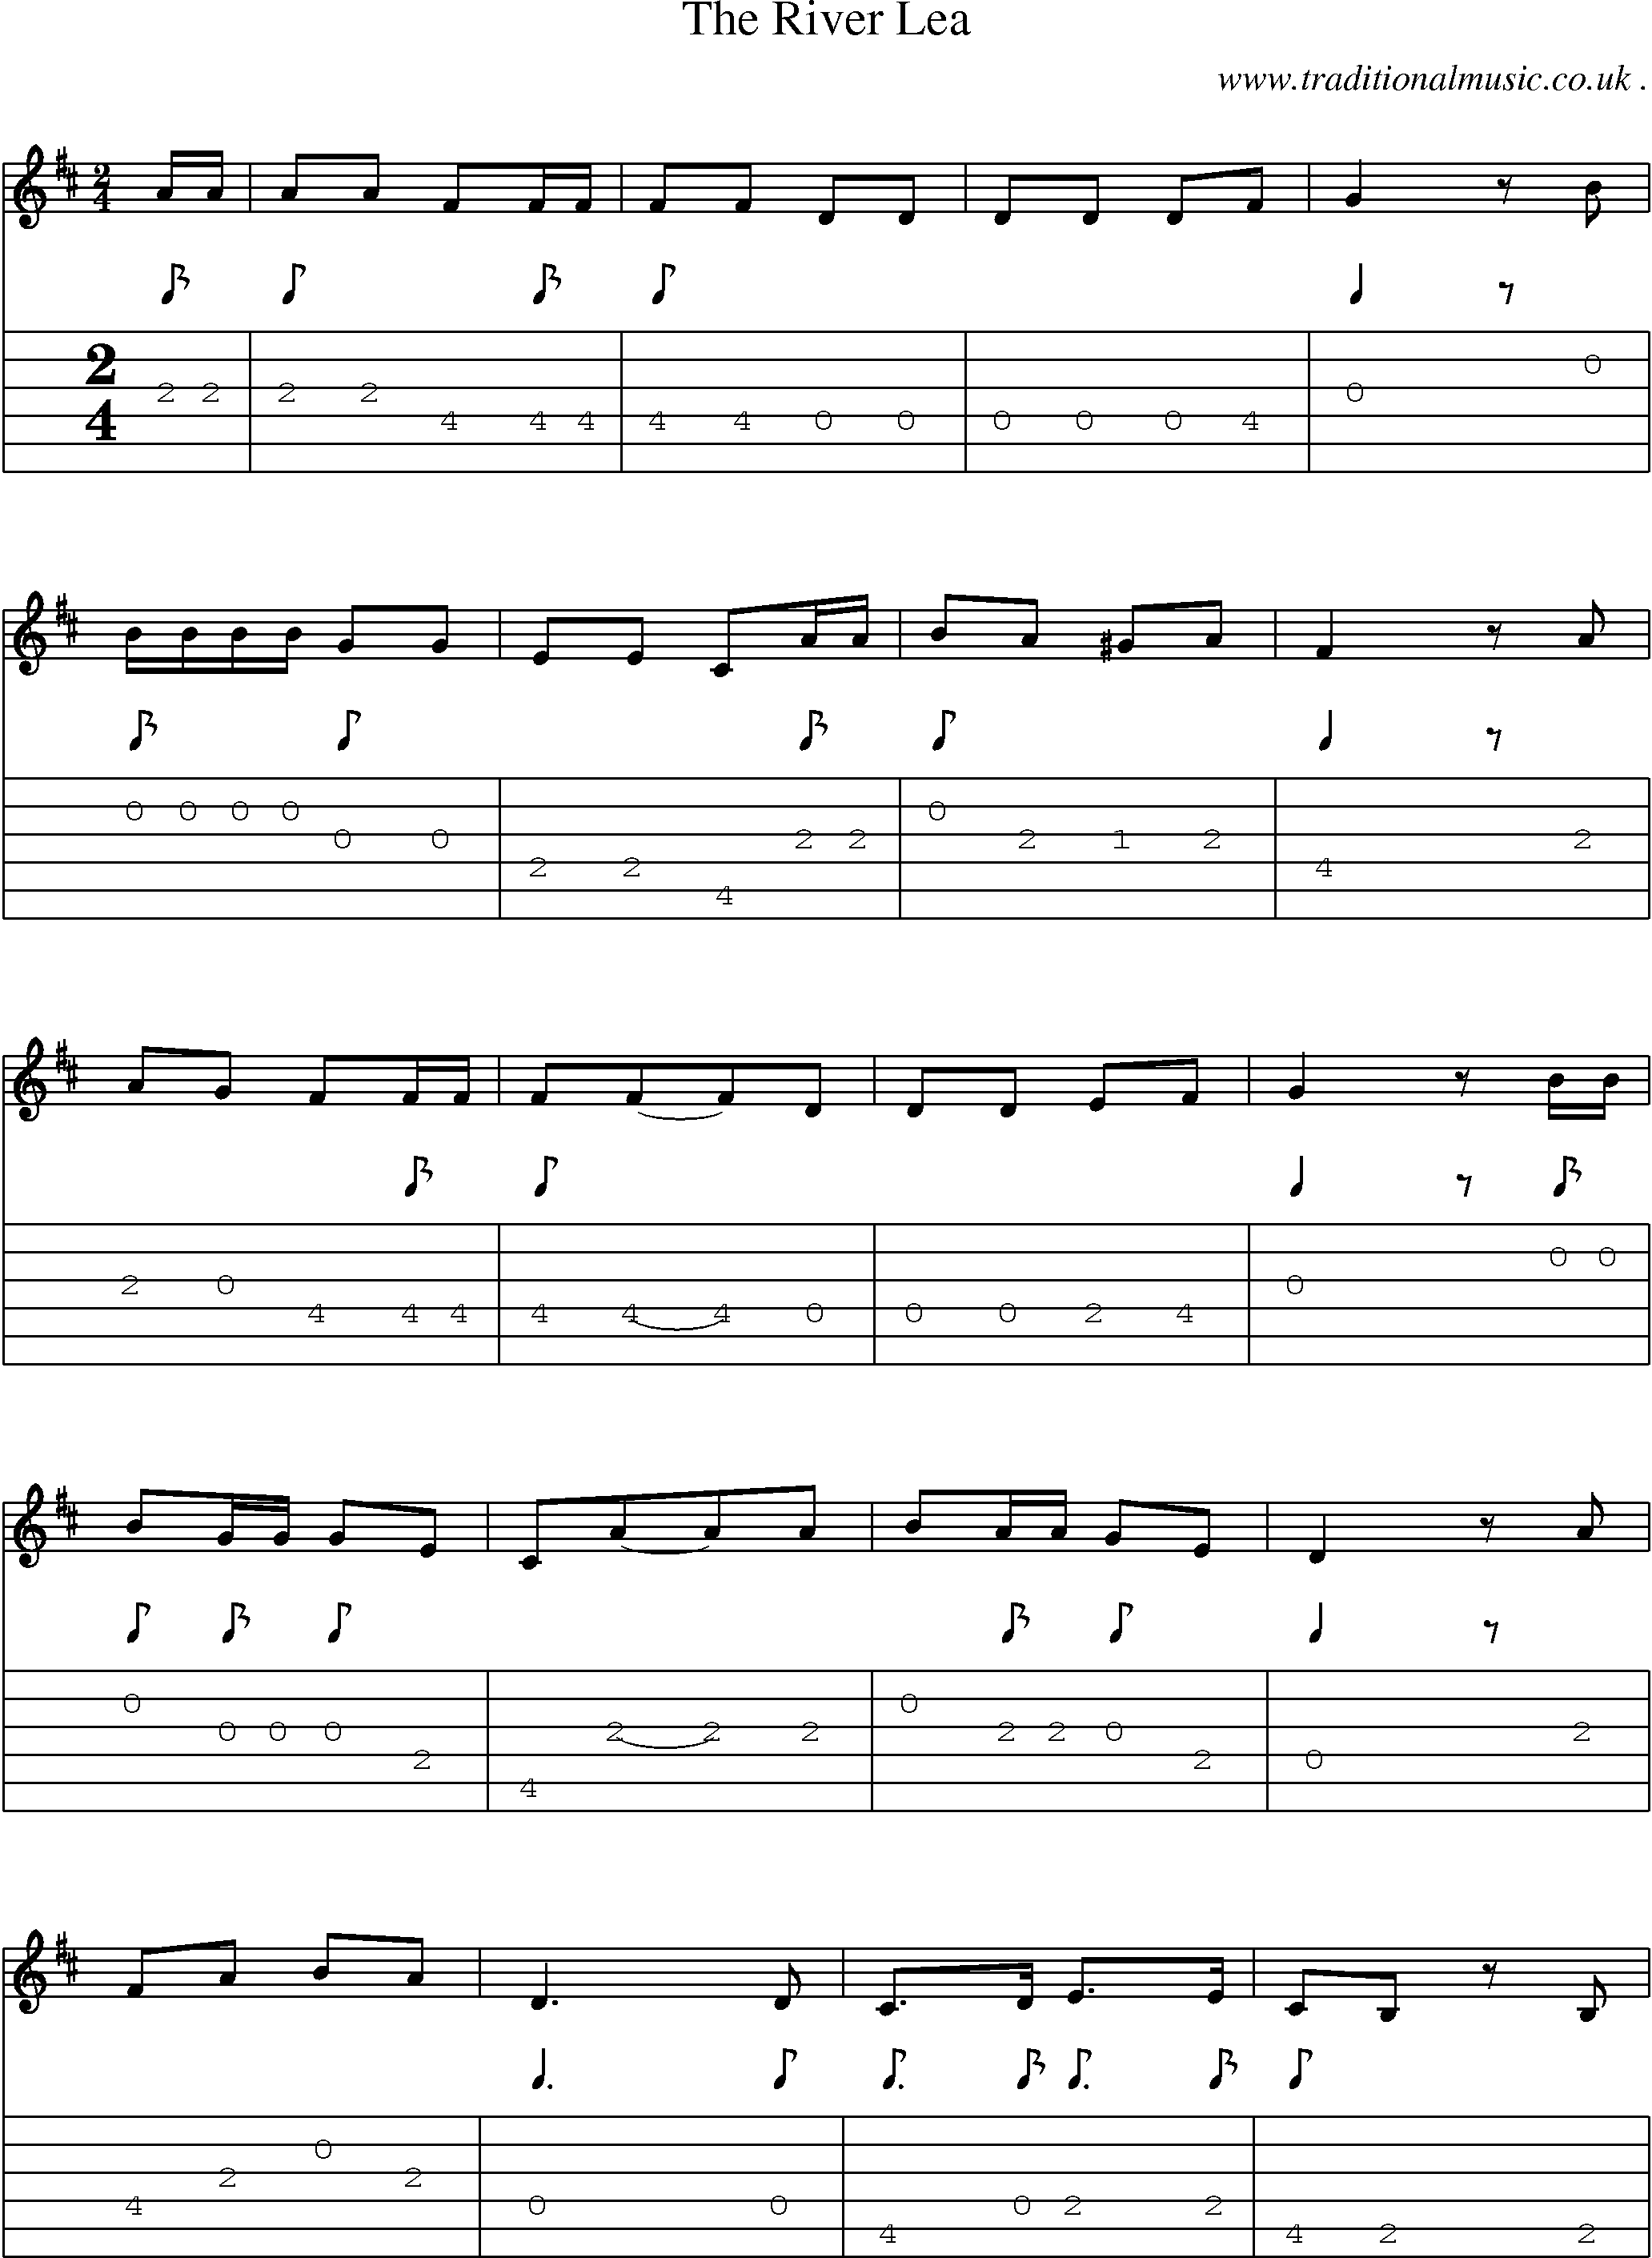 Sheet-Music and Guitar Tabs for The River Lea